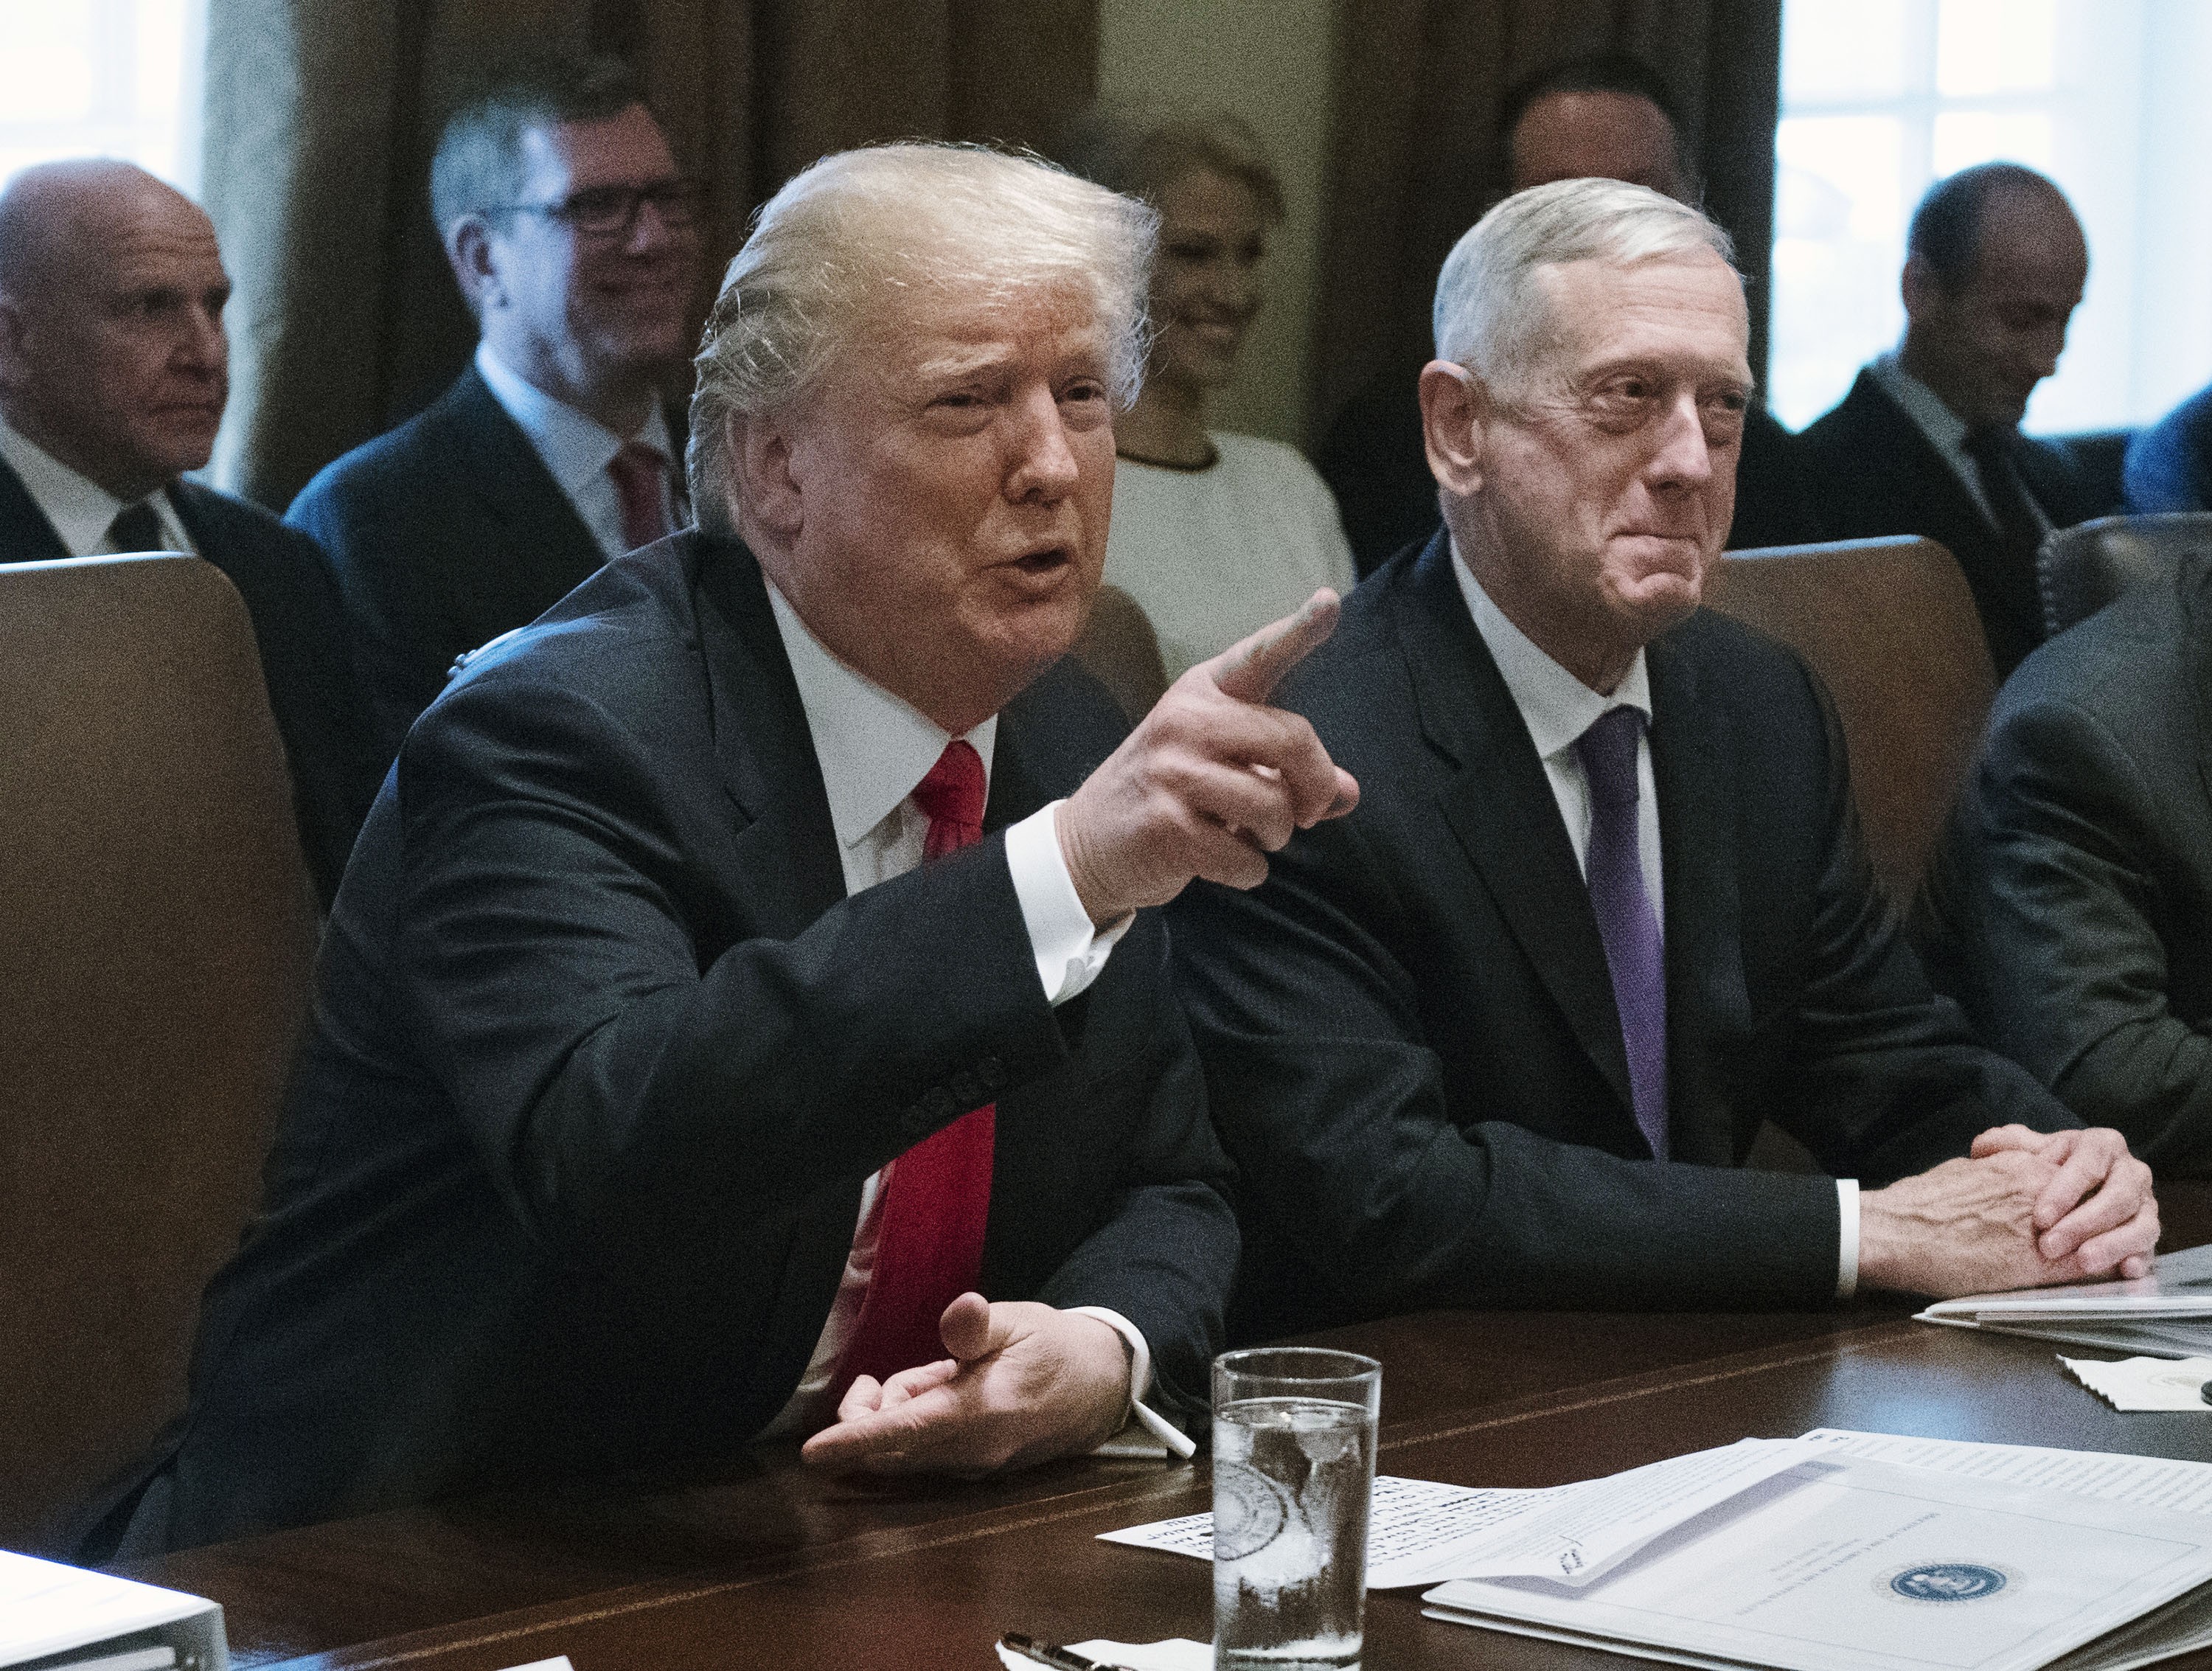 US President Donald Trump, left, speaks while his Secretary of Defence Jim Mattis listens during a cabinet meeting at the White House in Washington in January. The US’ aggressive nuclear posture review comes alongside an increased military budget, requested by Mattis, designed for “great power competition” against China and Russia. Photo: Bloomberg